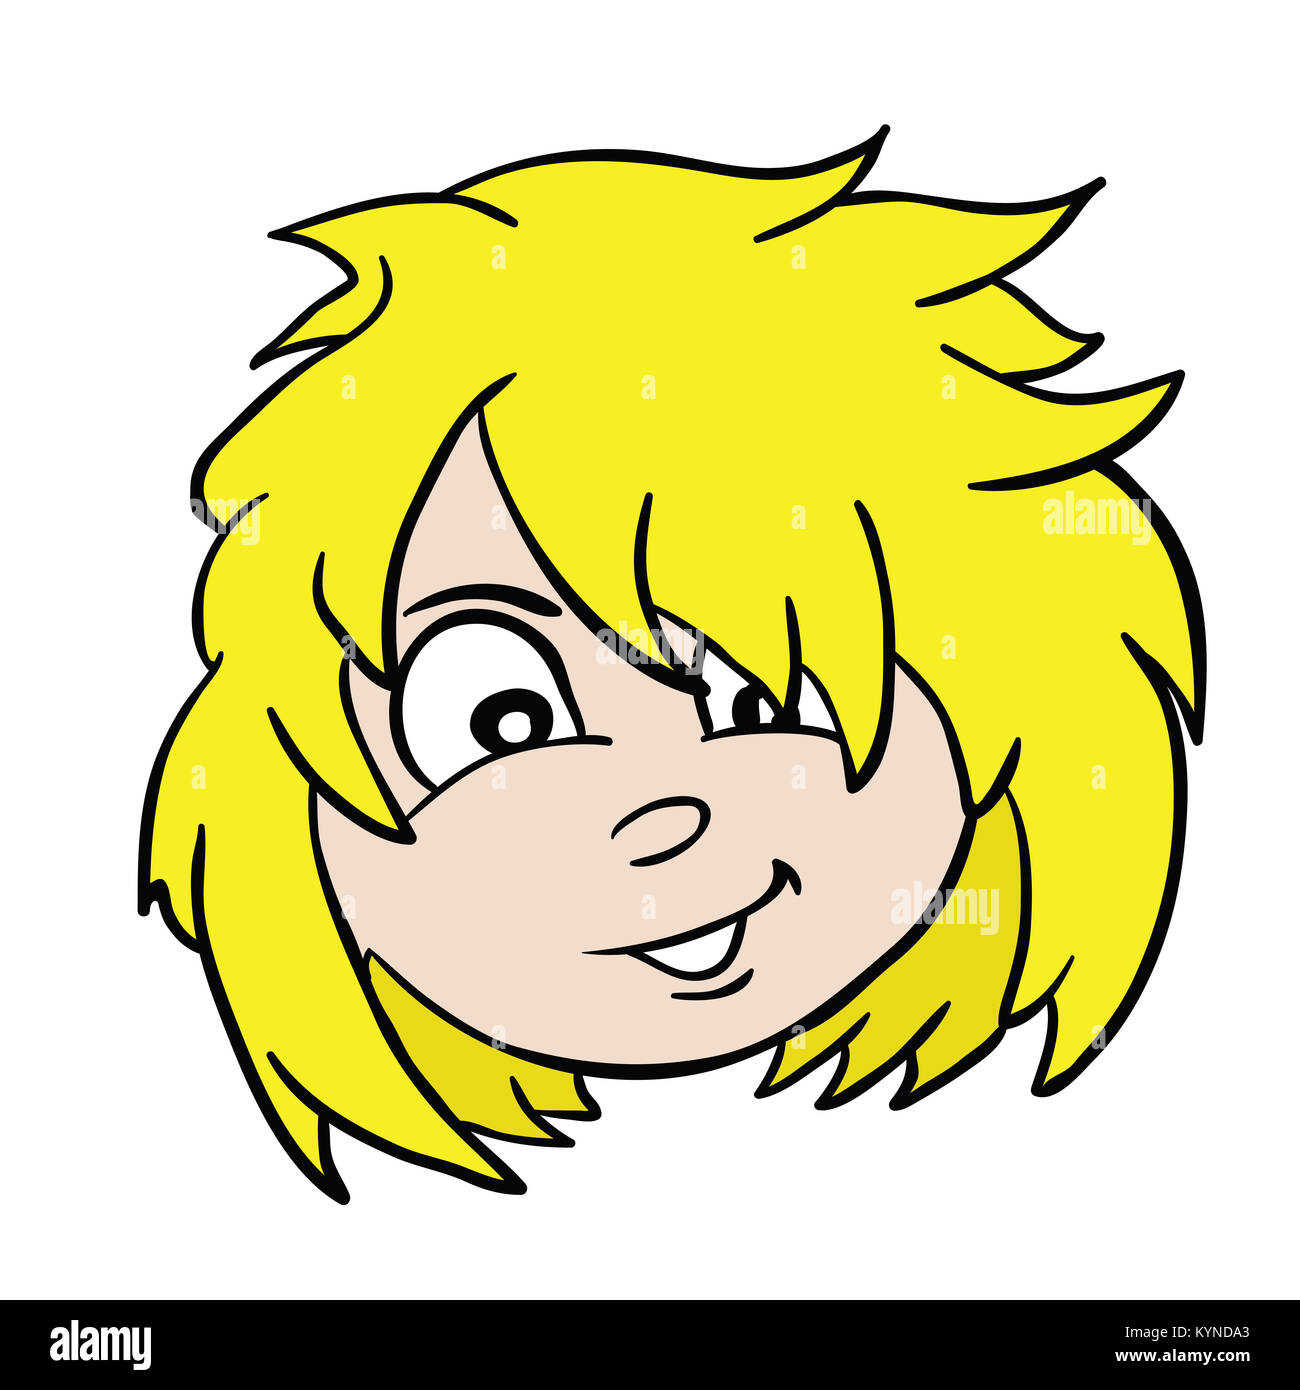 blonde girl with messy hair cartoon illustration Stock Photo - Alamy